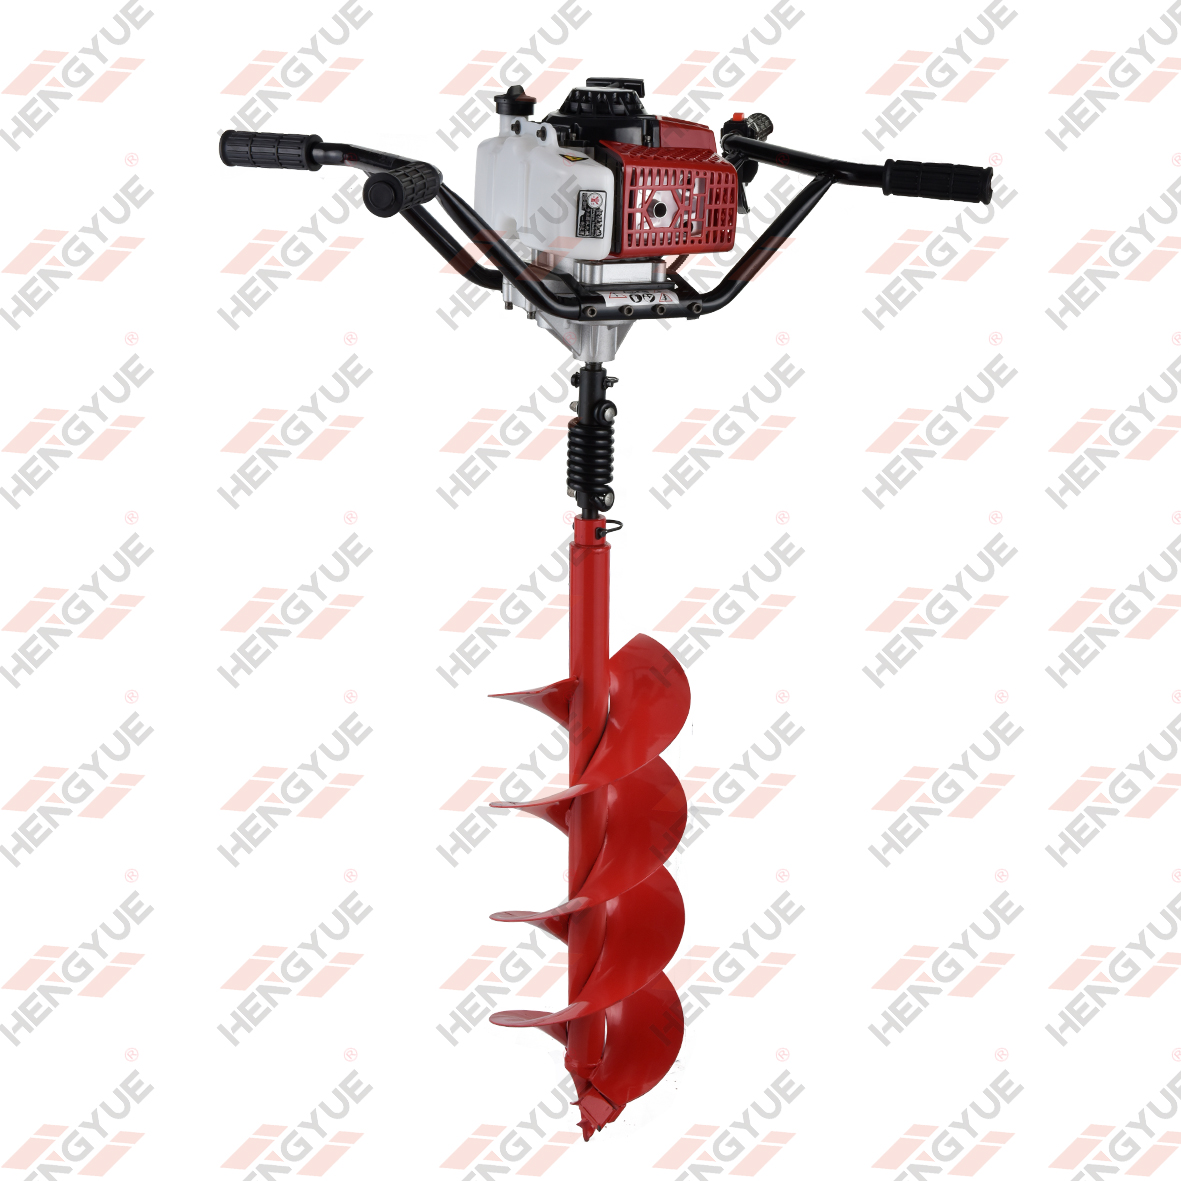 63/68cc 2 Man Operate Earth Auger Drilling Machine for Sales